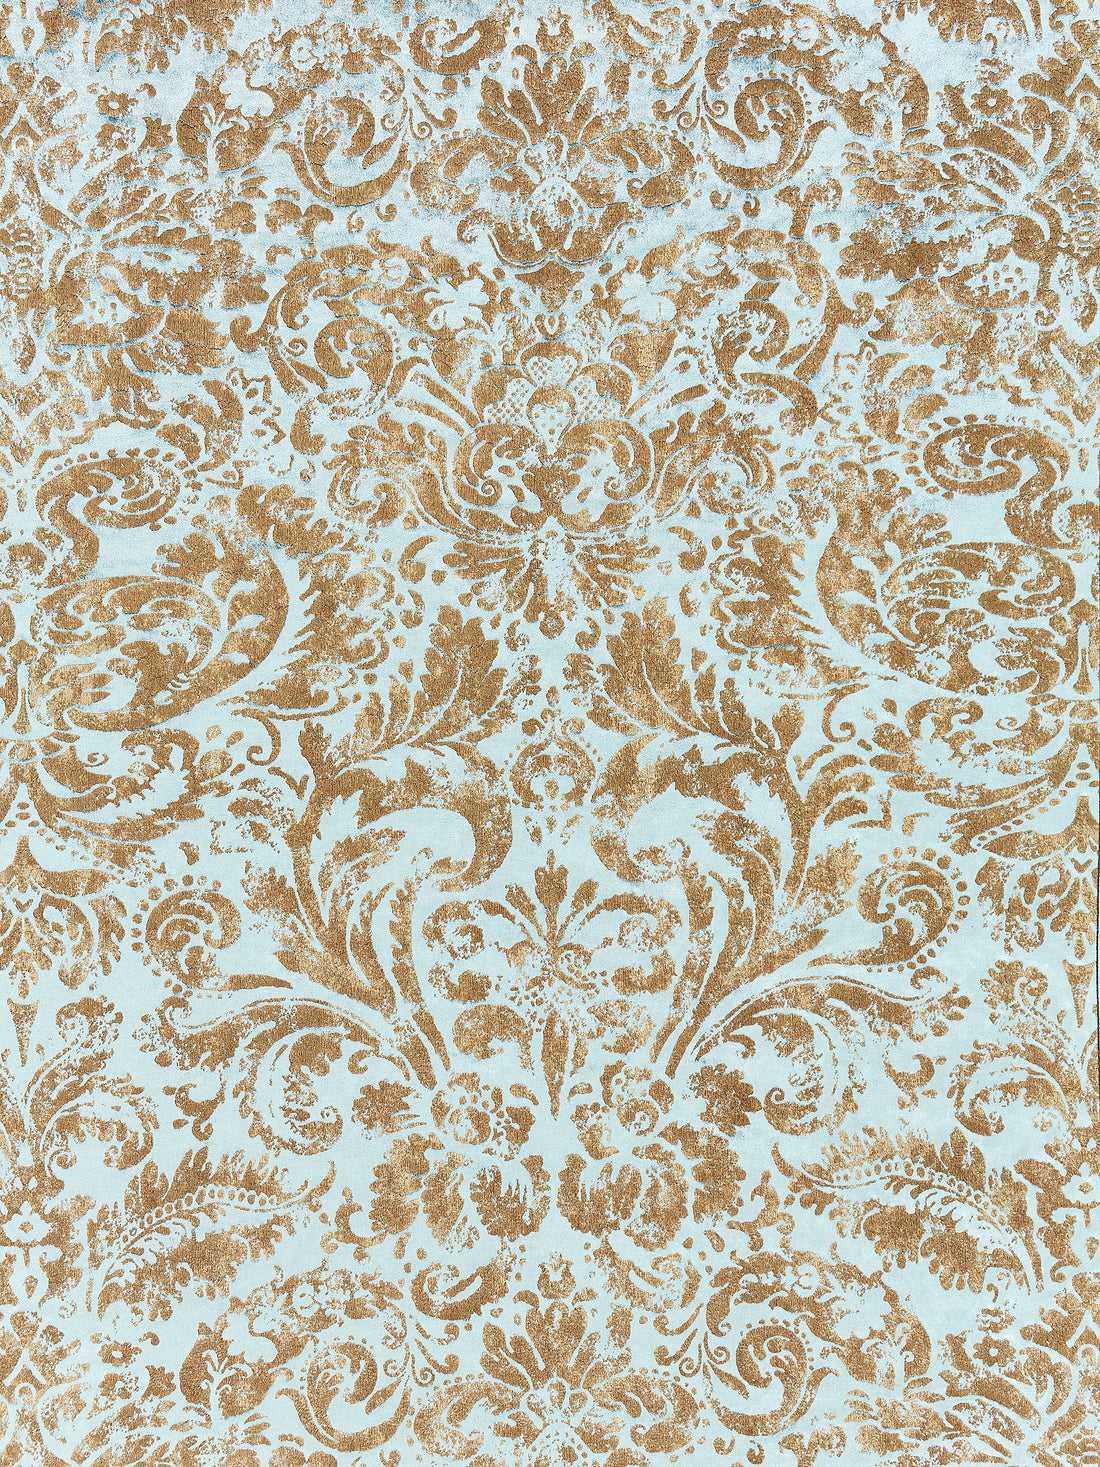 Palladio Velvet Damask fabric in verdigris color - pattern number SC 000416592 - by Scalamandre in the Scalamandre Fabrics Book 1 collection